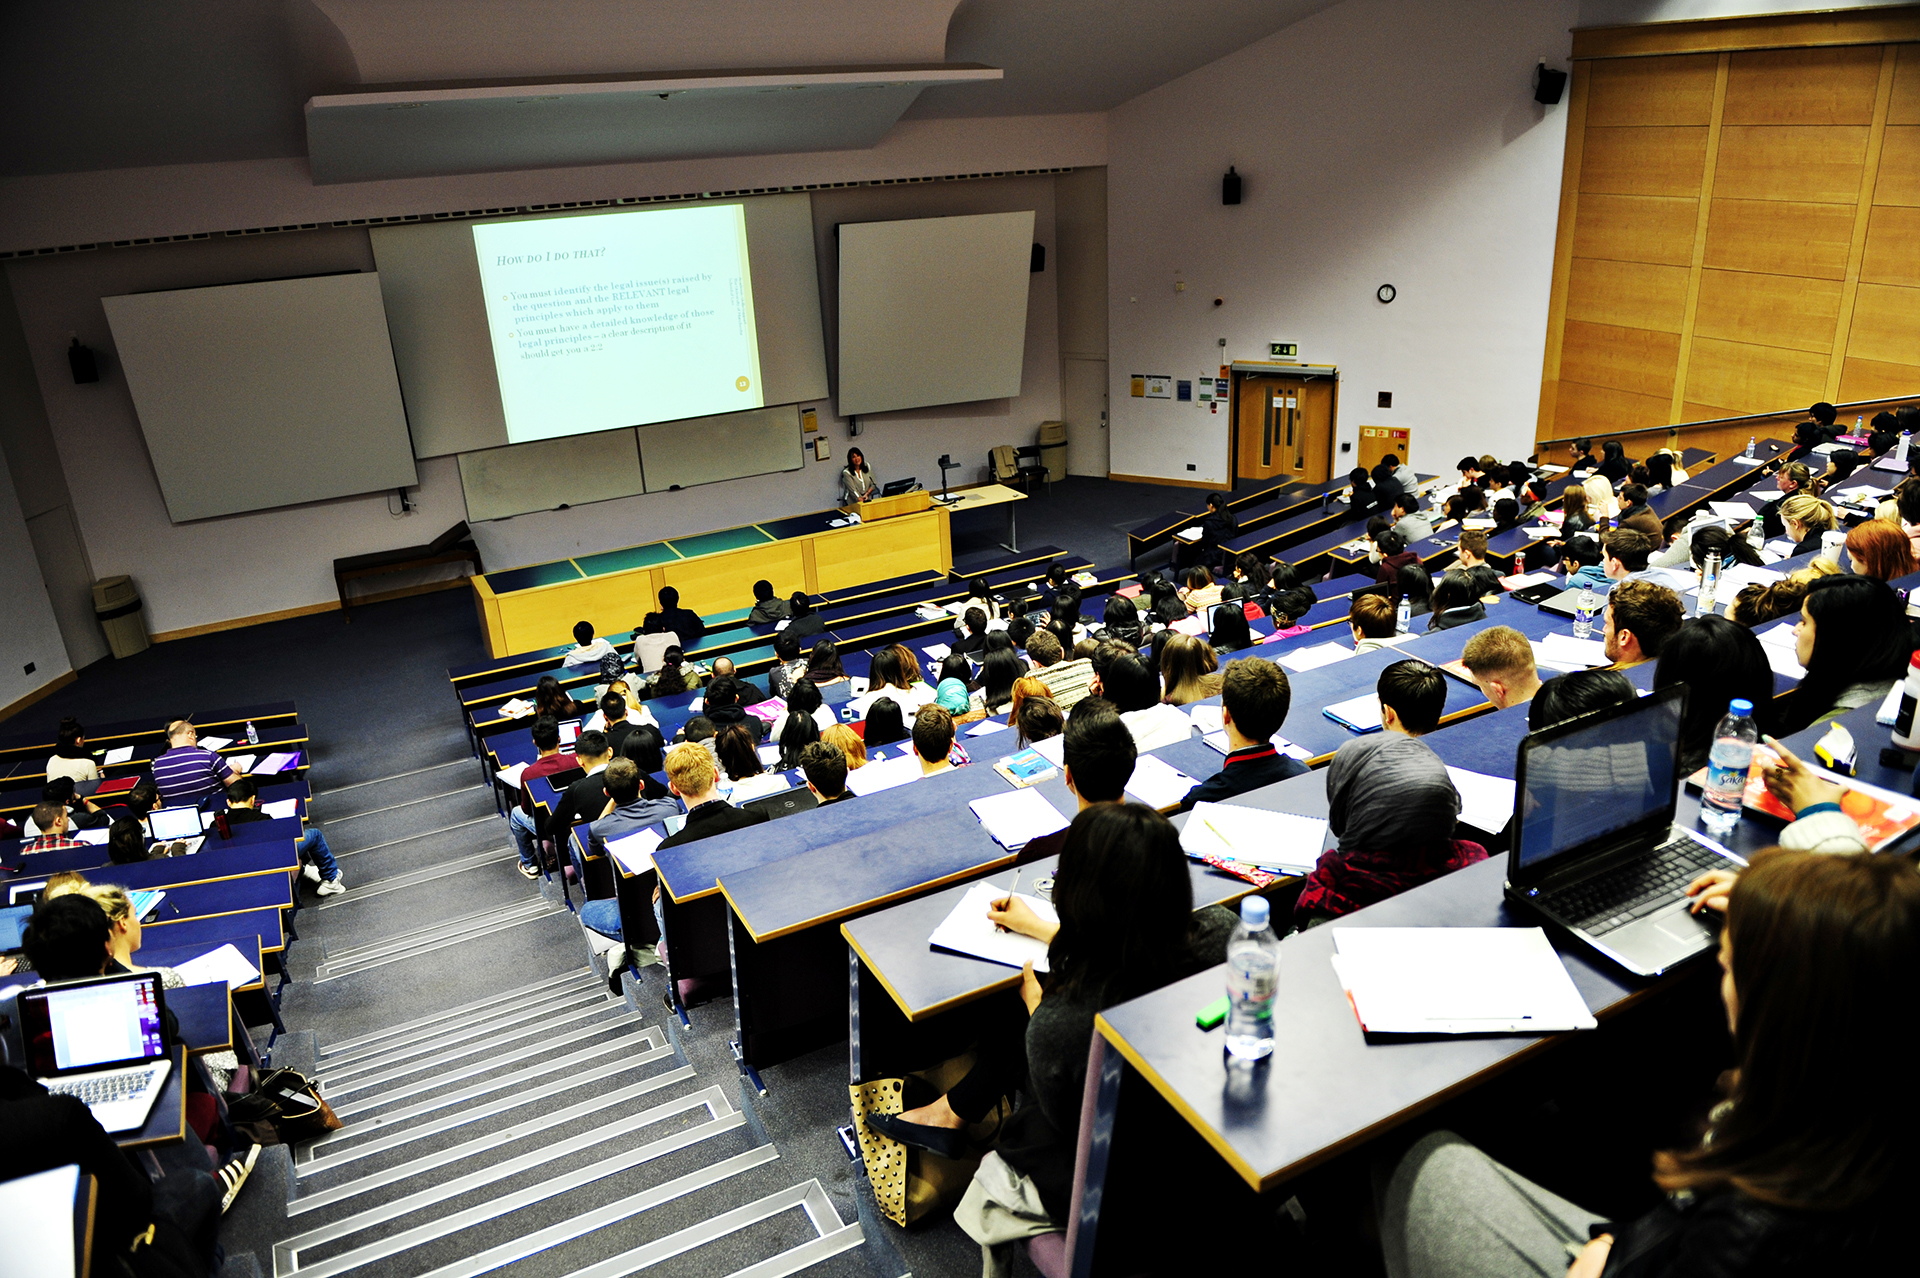 Students watch a presentation in the lecture hall